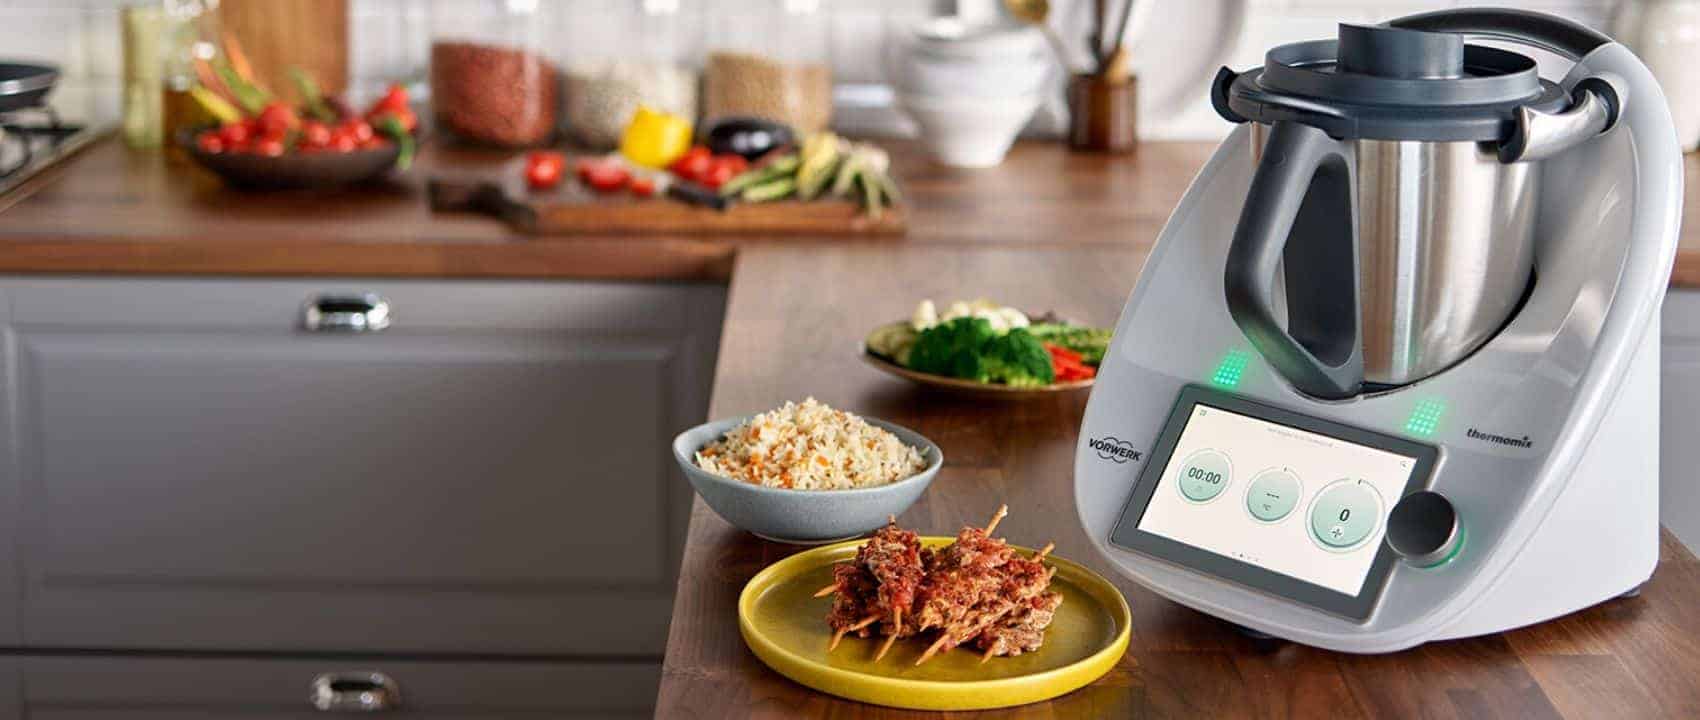 Thermomix TM6 Pricing